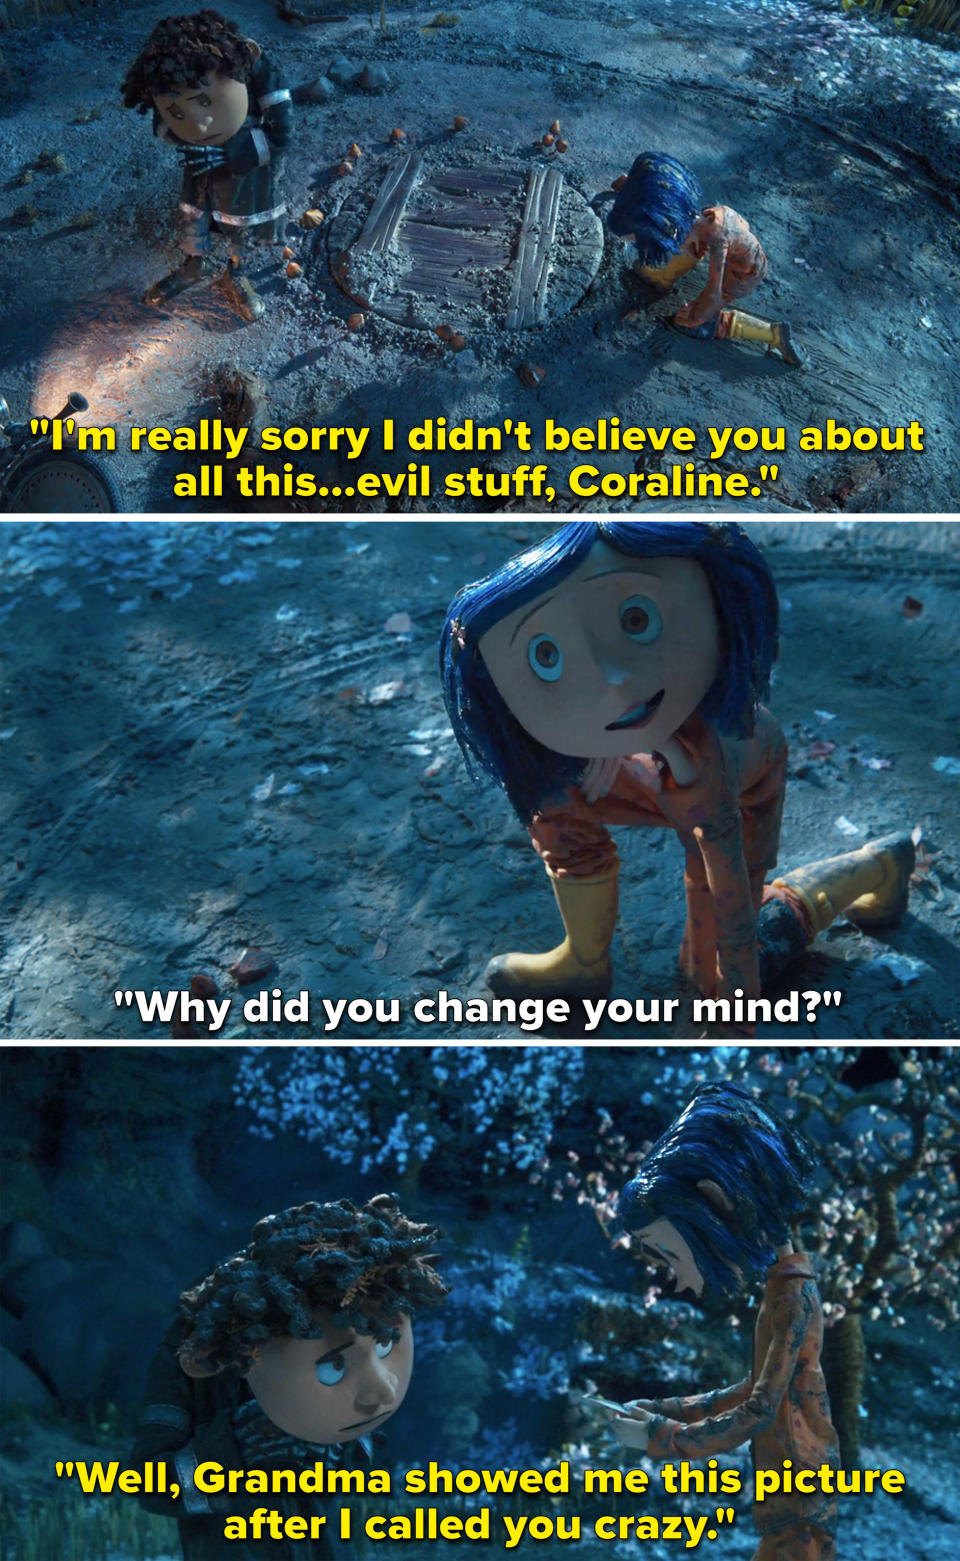 Wylie saying, "I'm really sorry I didn't believe you about all this evil stuff, Coraline"